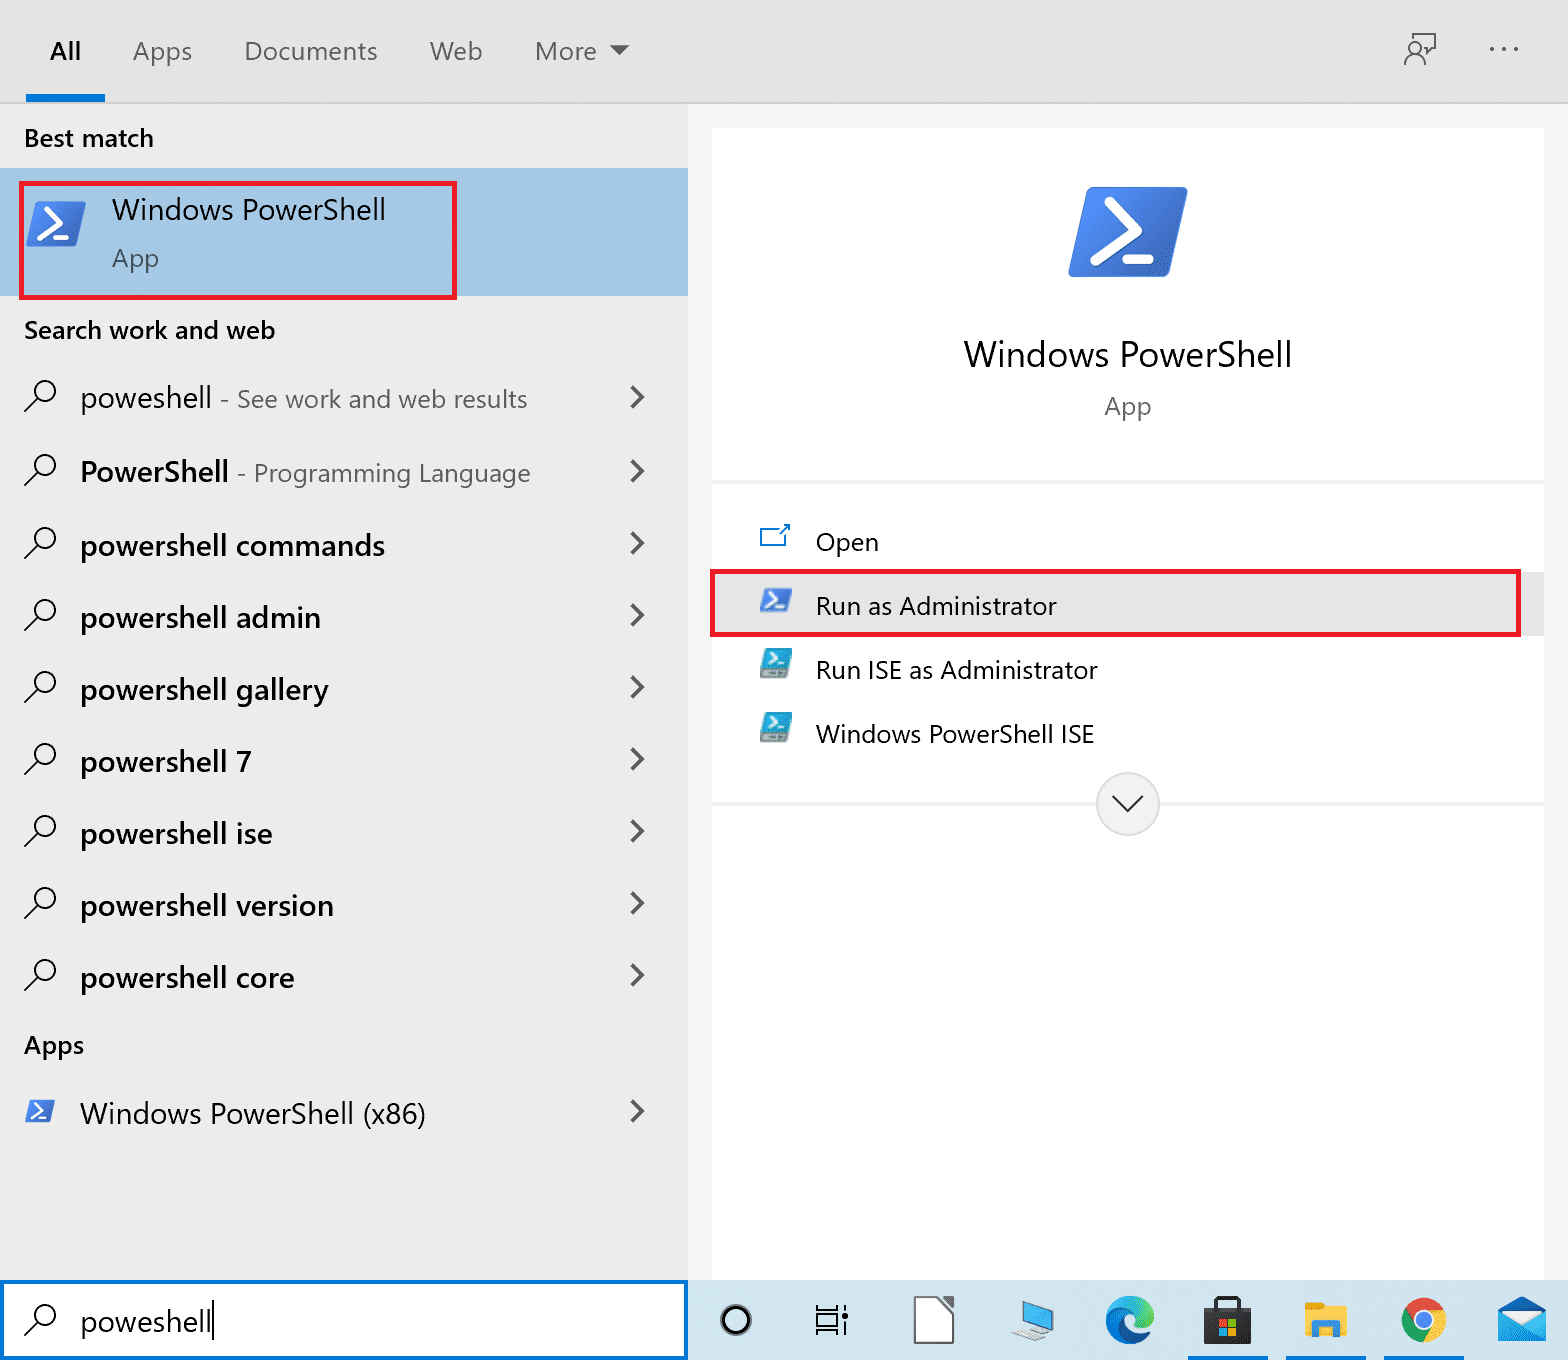 Type Powershell in the Windows search bar and then launch Windows Powershell 